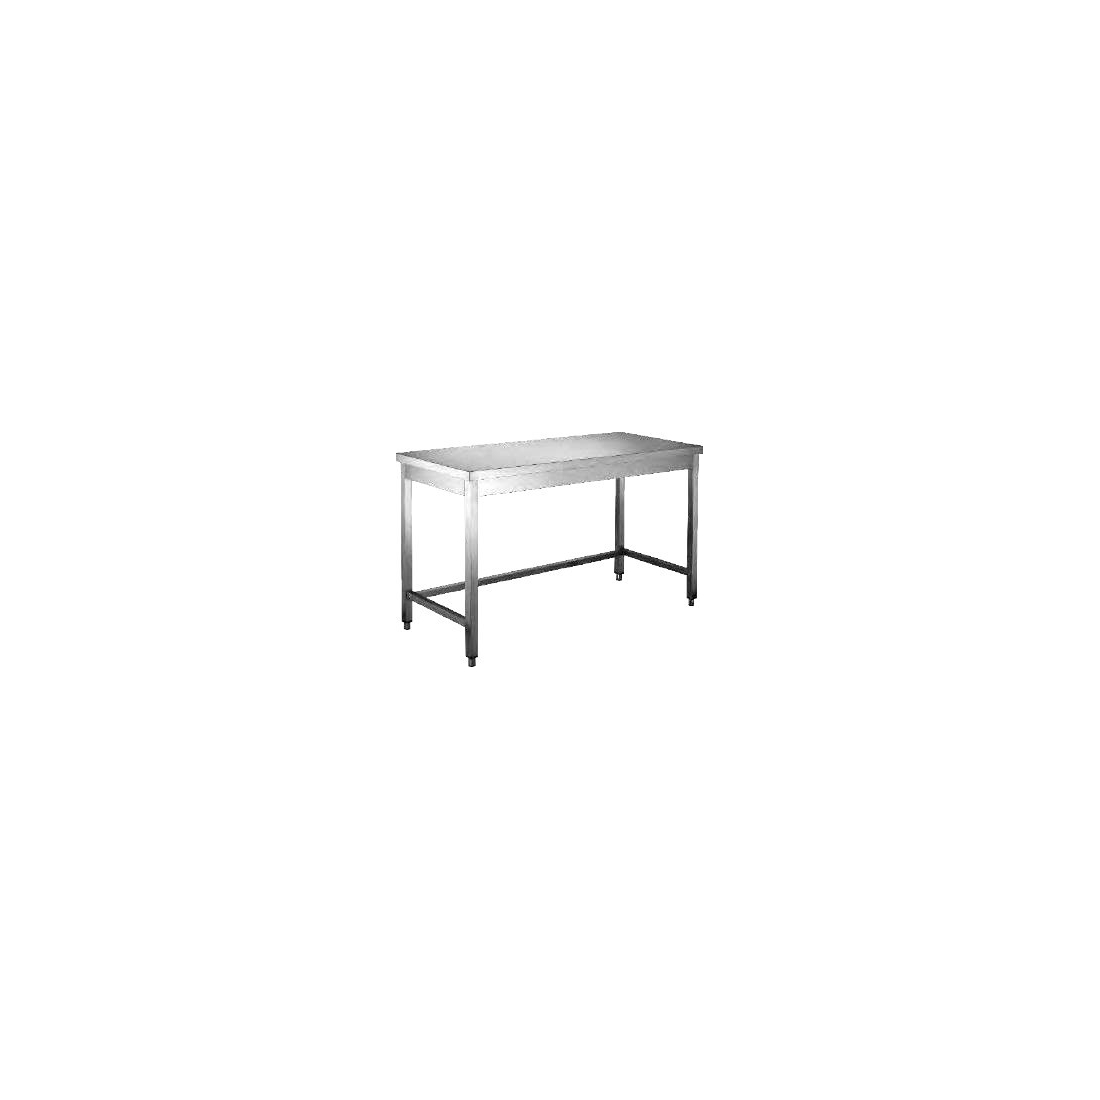 Stainless Steel Service Table 1.8m (WTD-181)|mkayn|مكاين